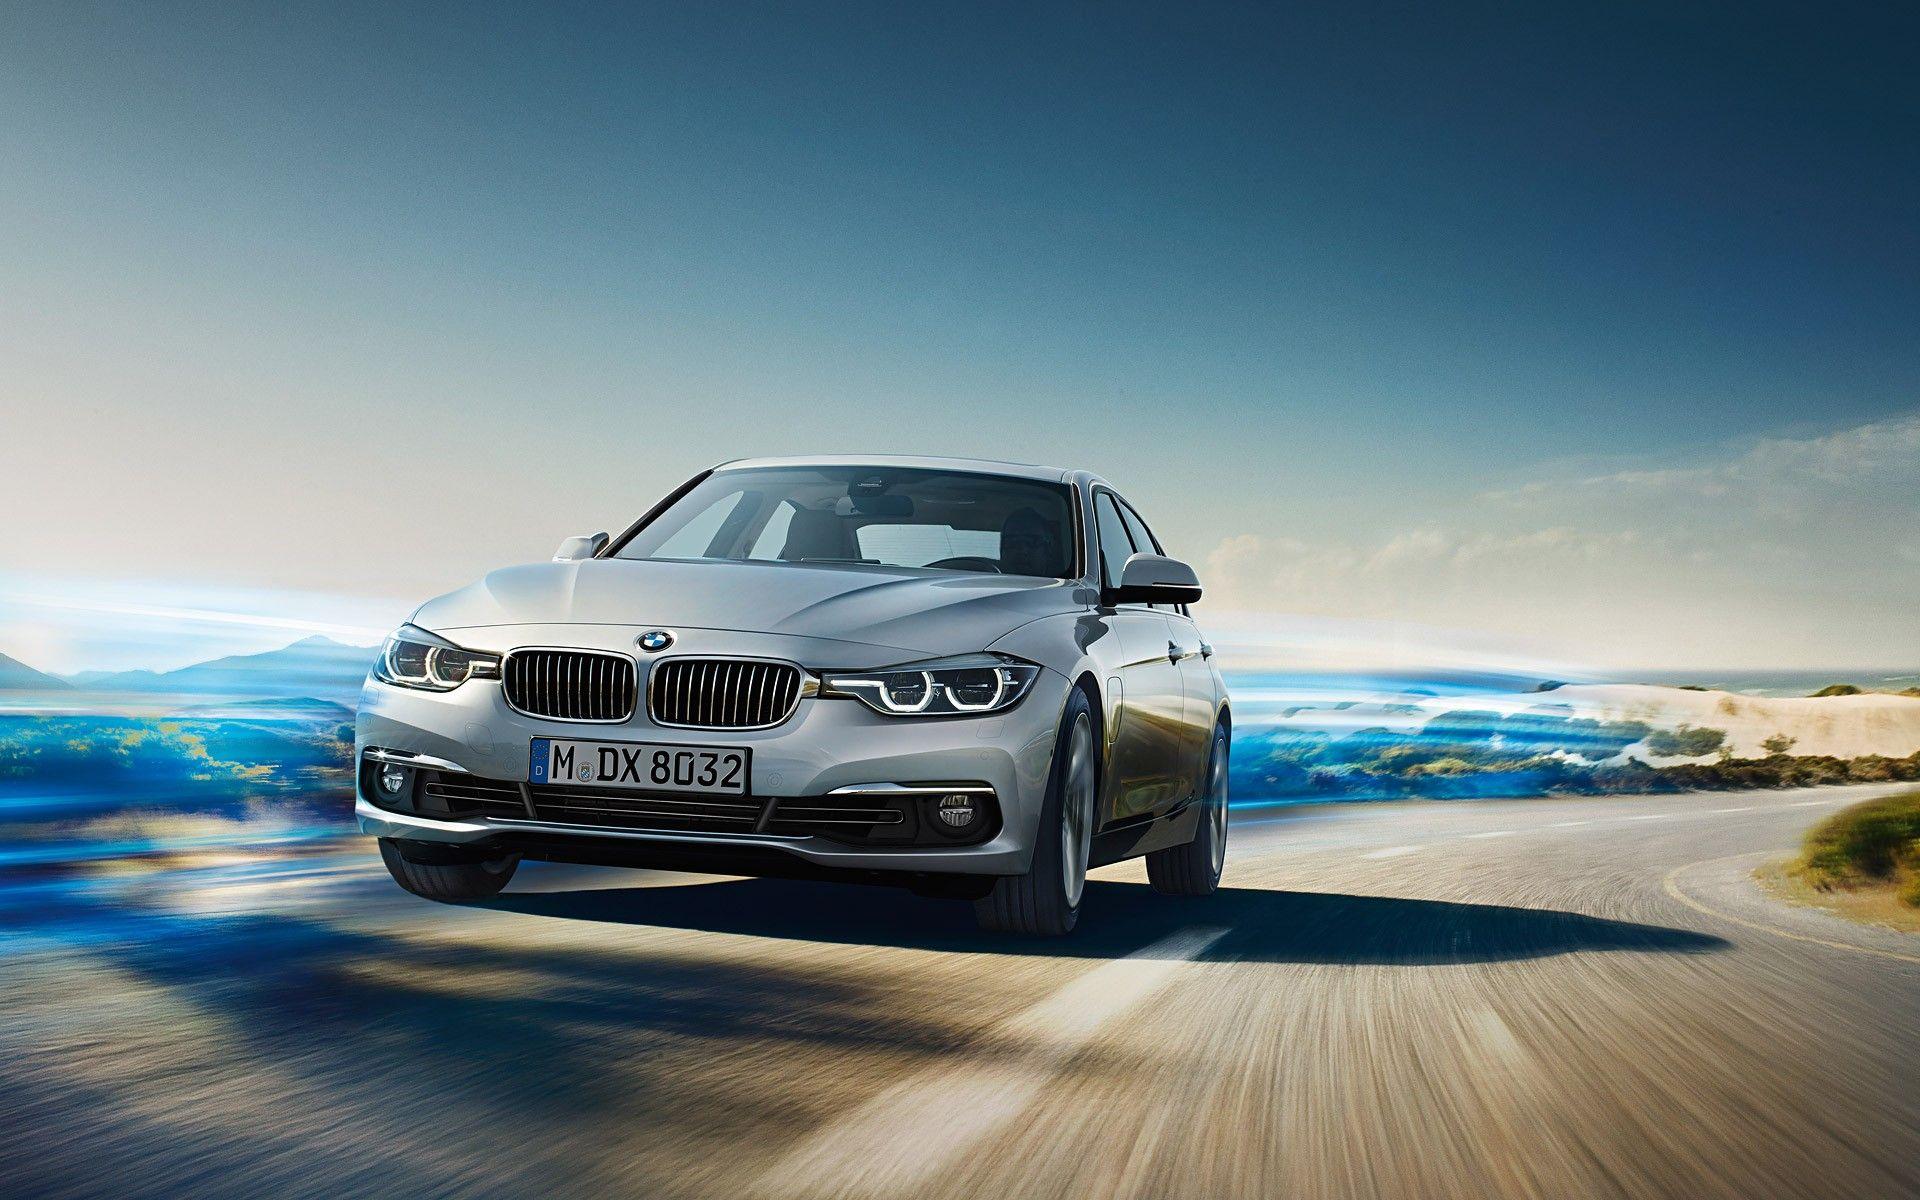 Your Batch of 2016 BMW 3 Series Facelift Wallpaper Is Here